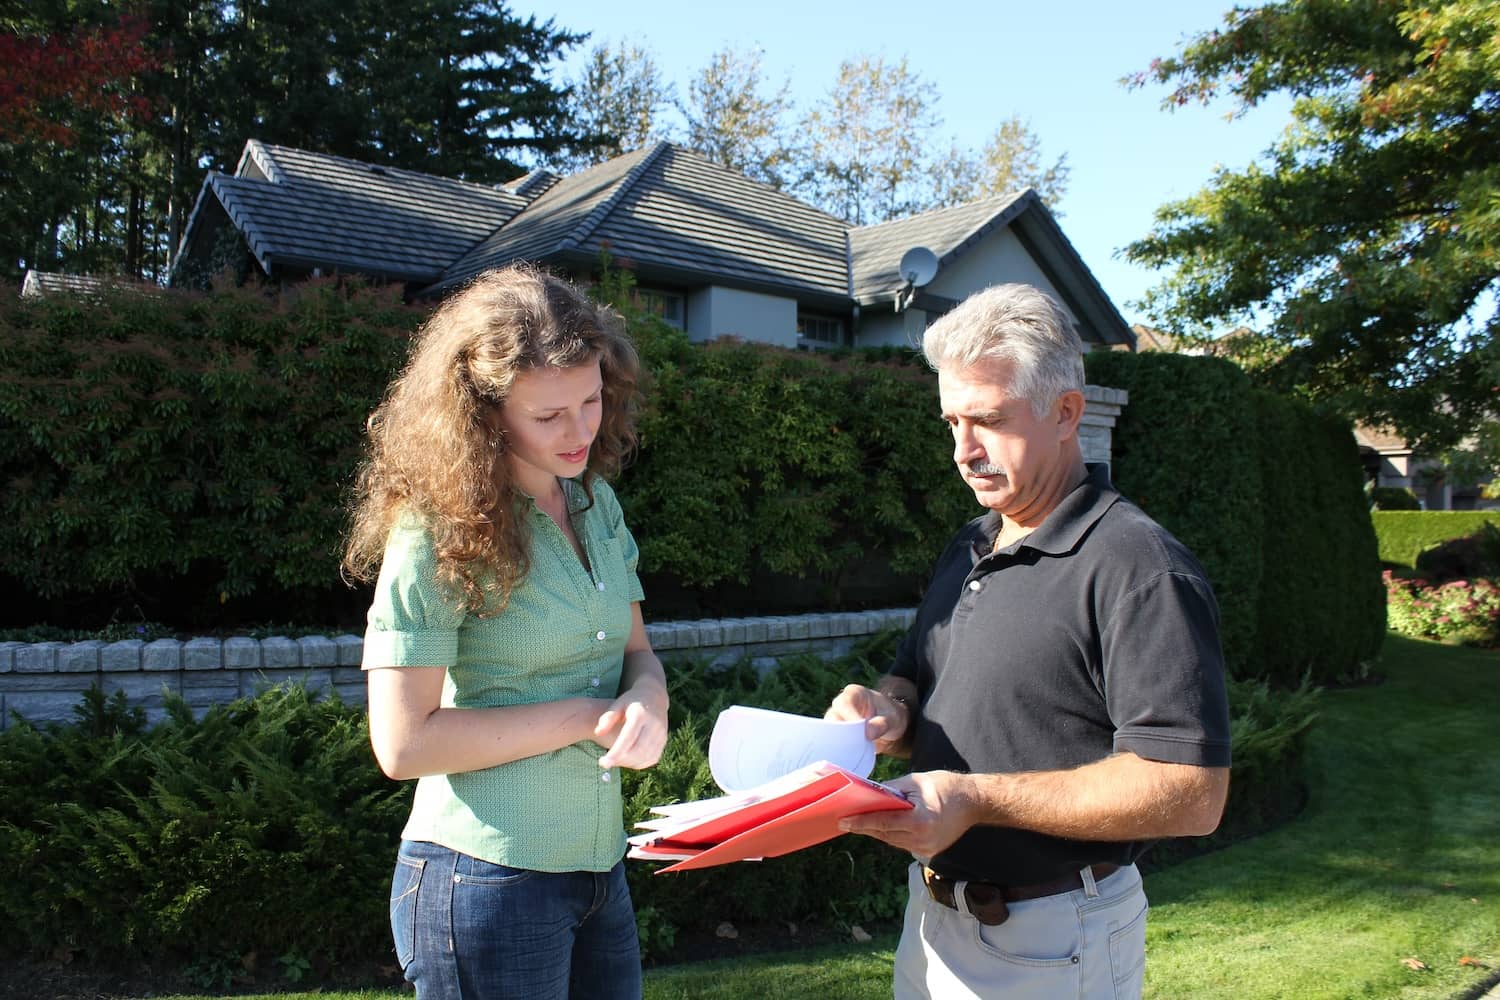 House inspections are most commonly scheduled for real estate transactions, but never hesitate to call a professional. 